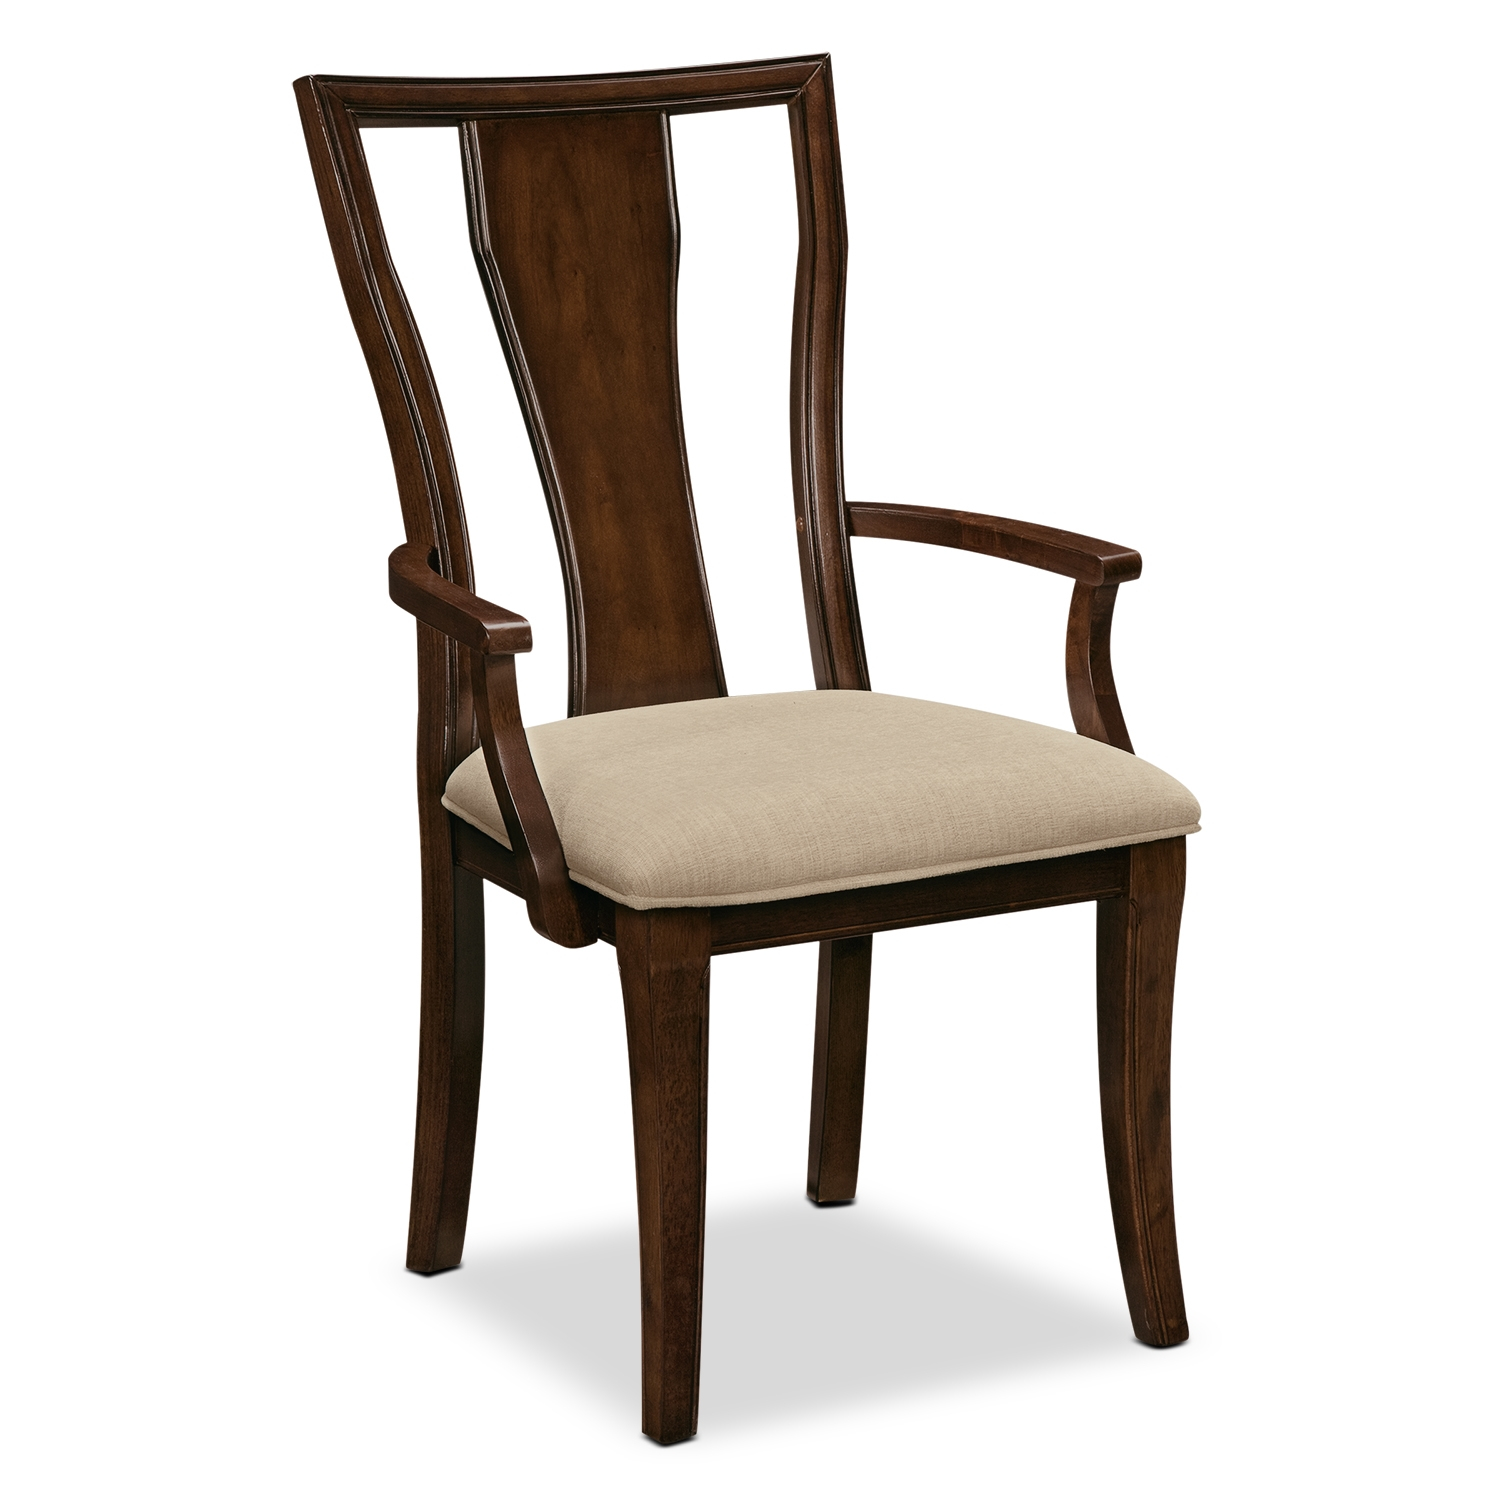 Dining Room Arm Chairs Classic Design For Your Modern Home intended for dimensions 1500 X 1500